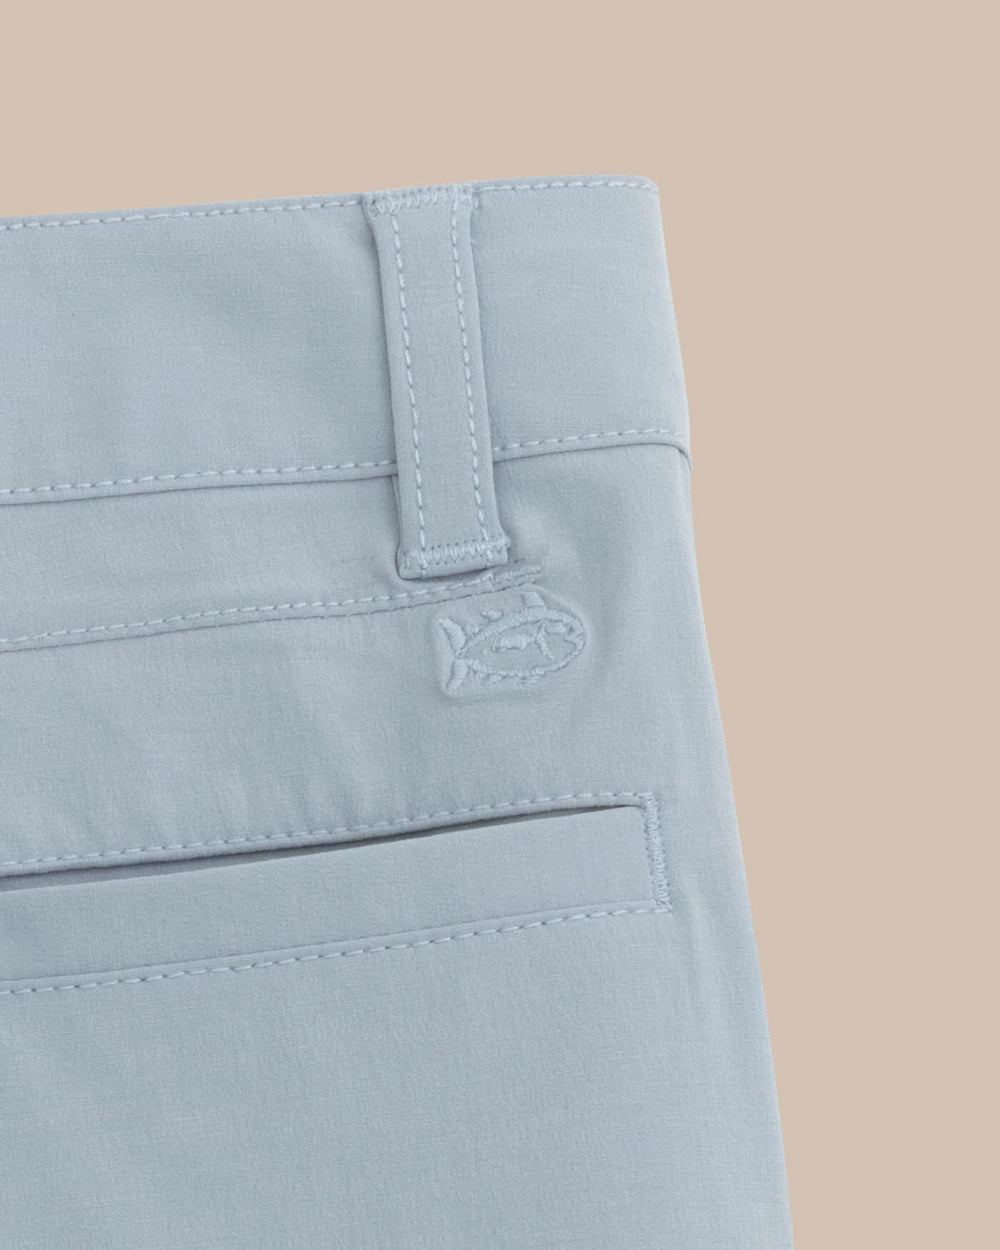 The detail view of the Southern Tide Boys T3 Gulf Short by Southern Tide - Tsunami Grey